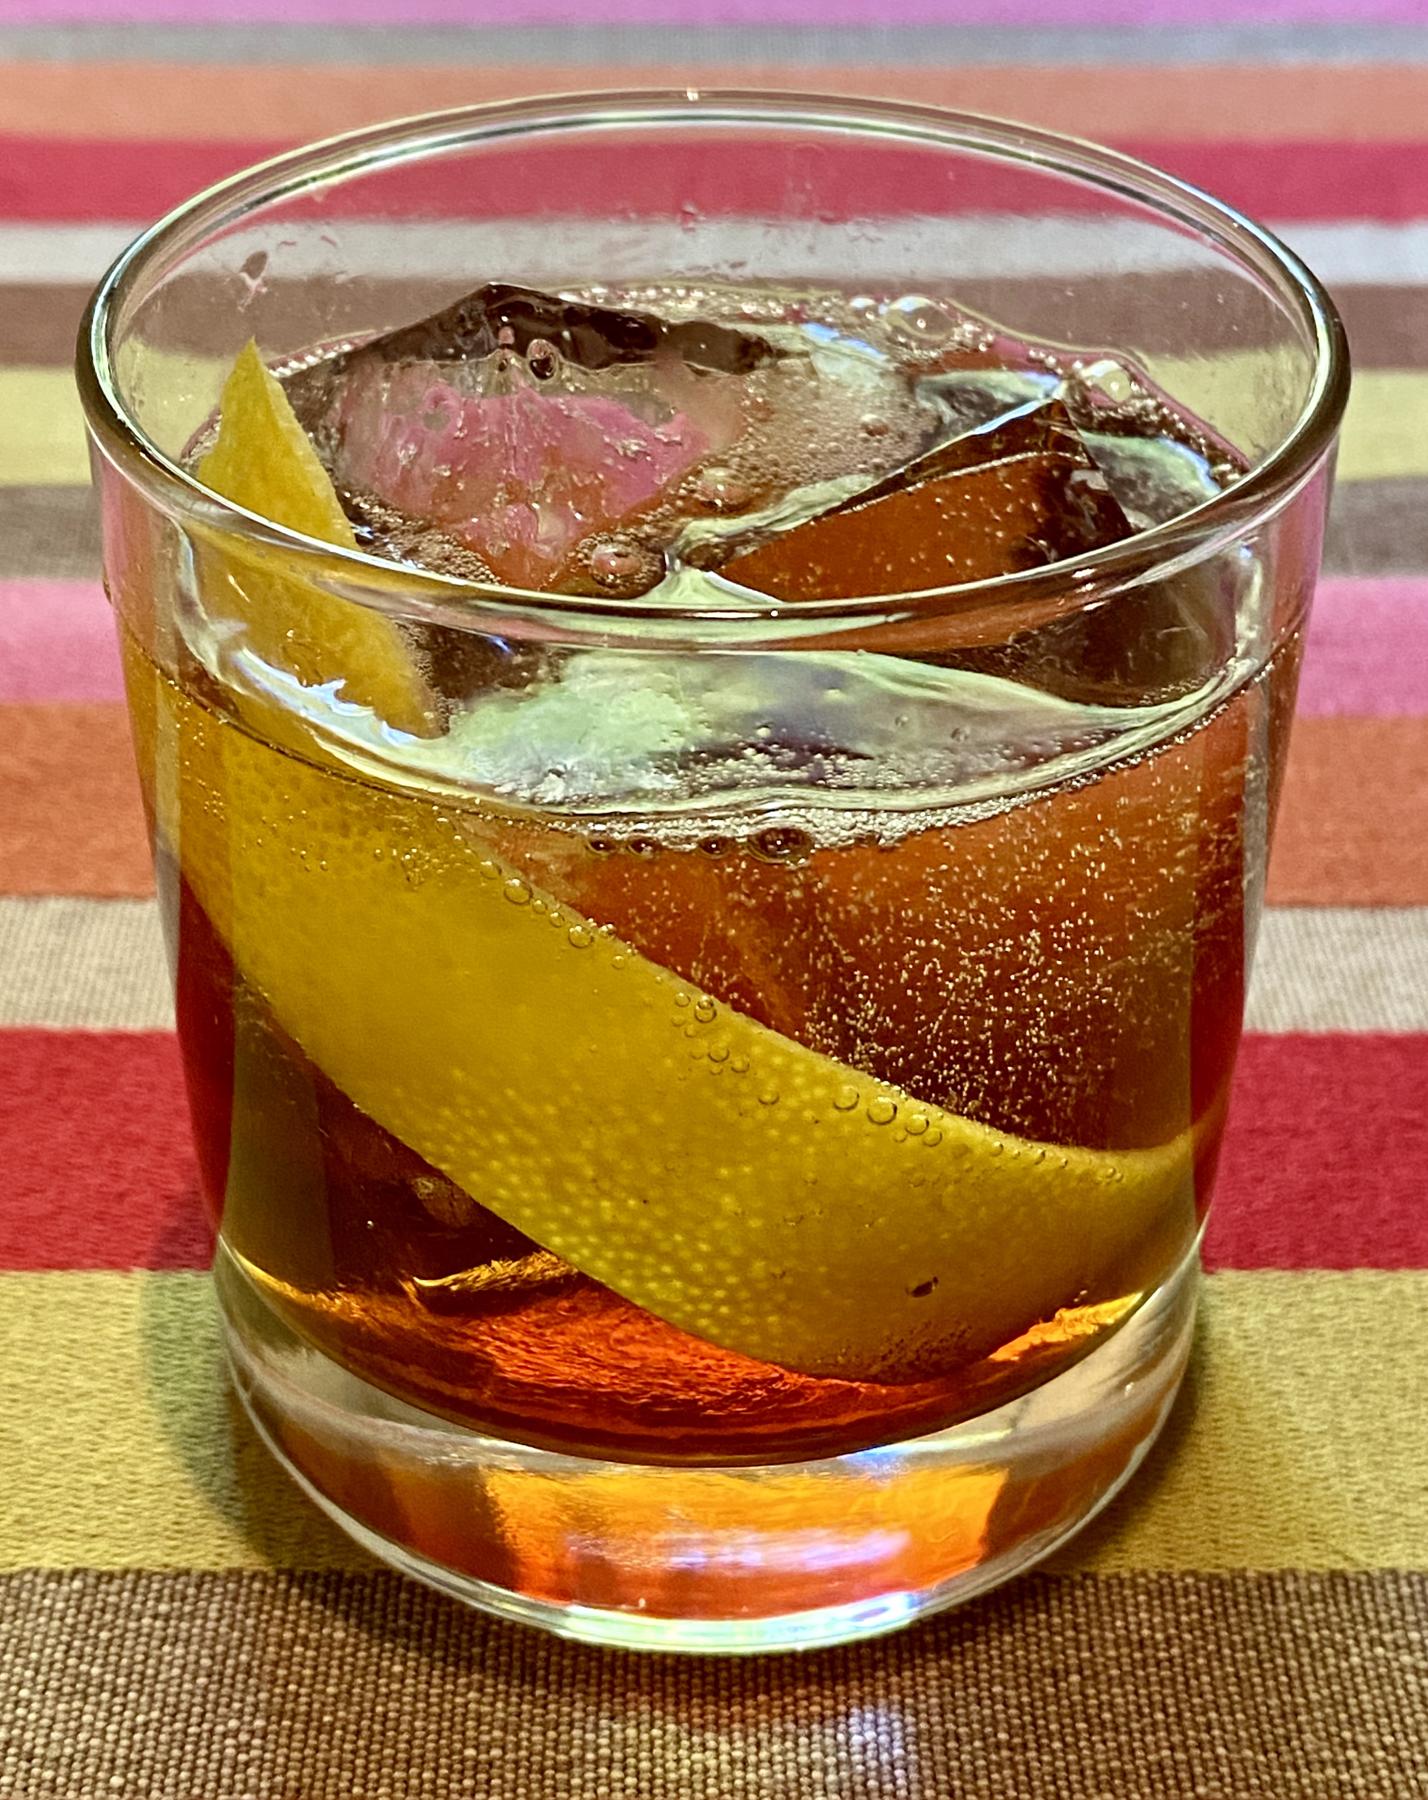 An example of the Mattei Rouge Spritz, the mixed drink (drink) featuring Mattei Cap Corse Rouge Quinquina, soda water, and grapefruit twist; photo by Martin Doudoroff